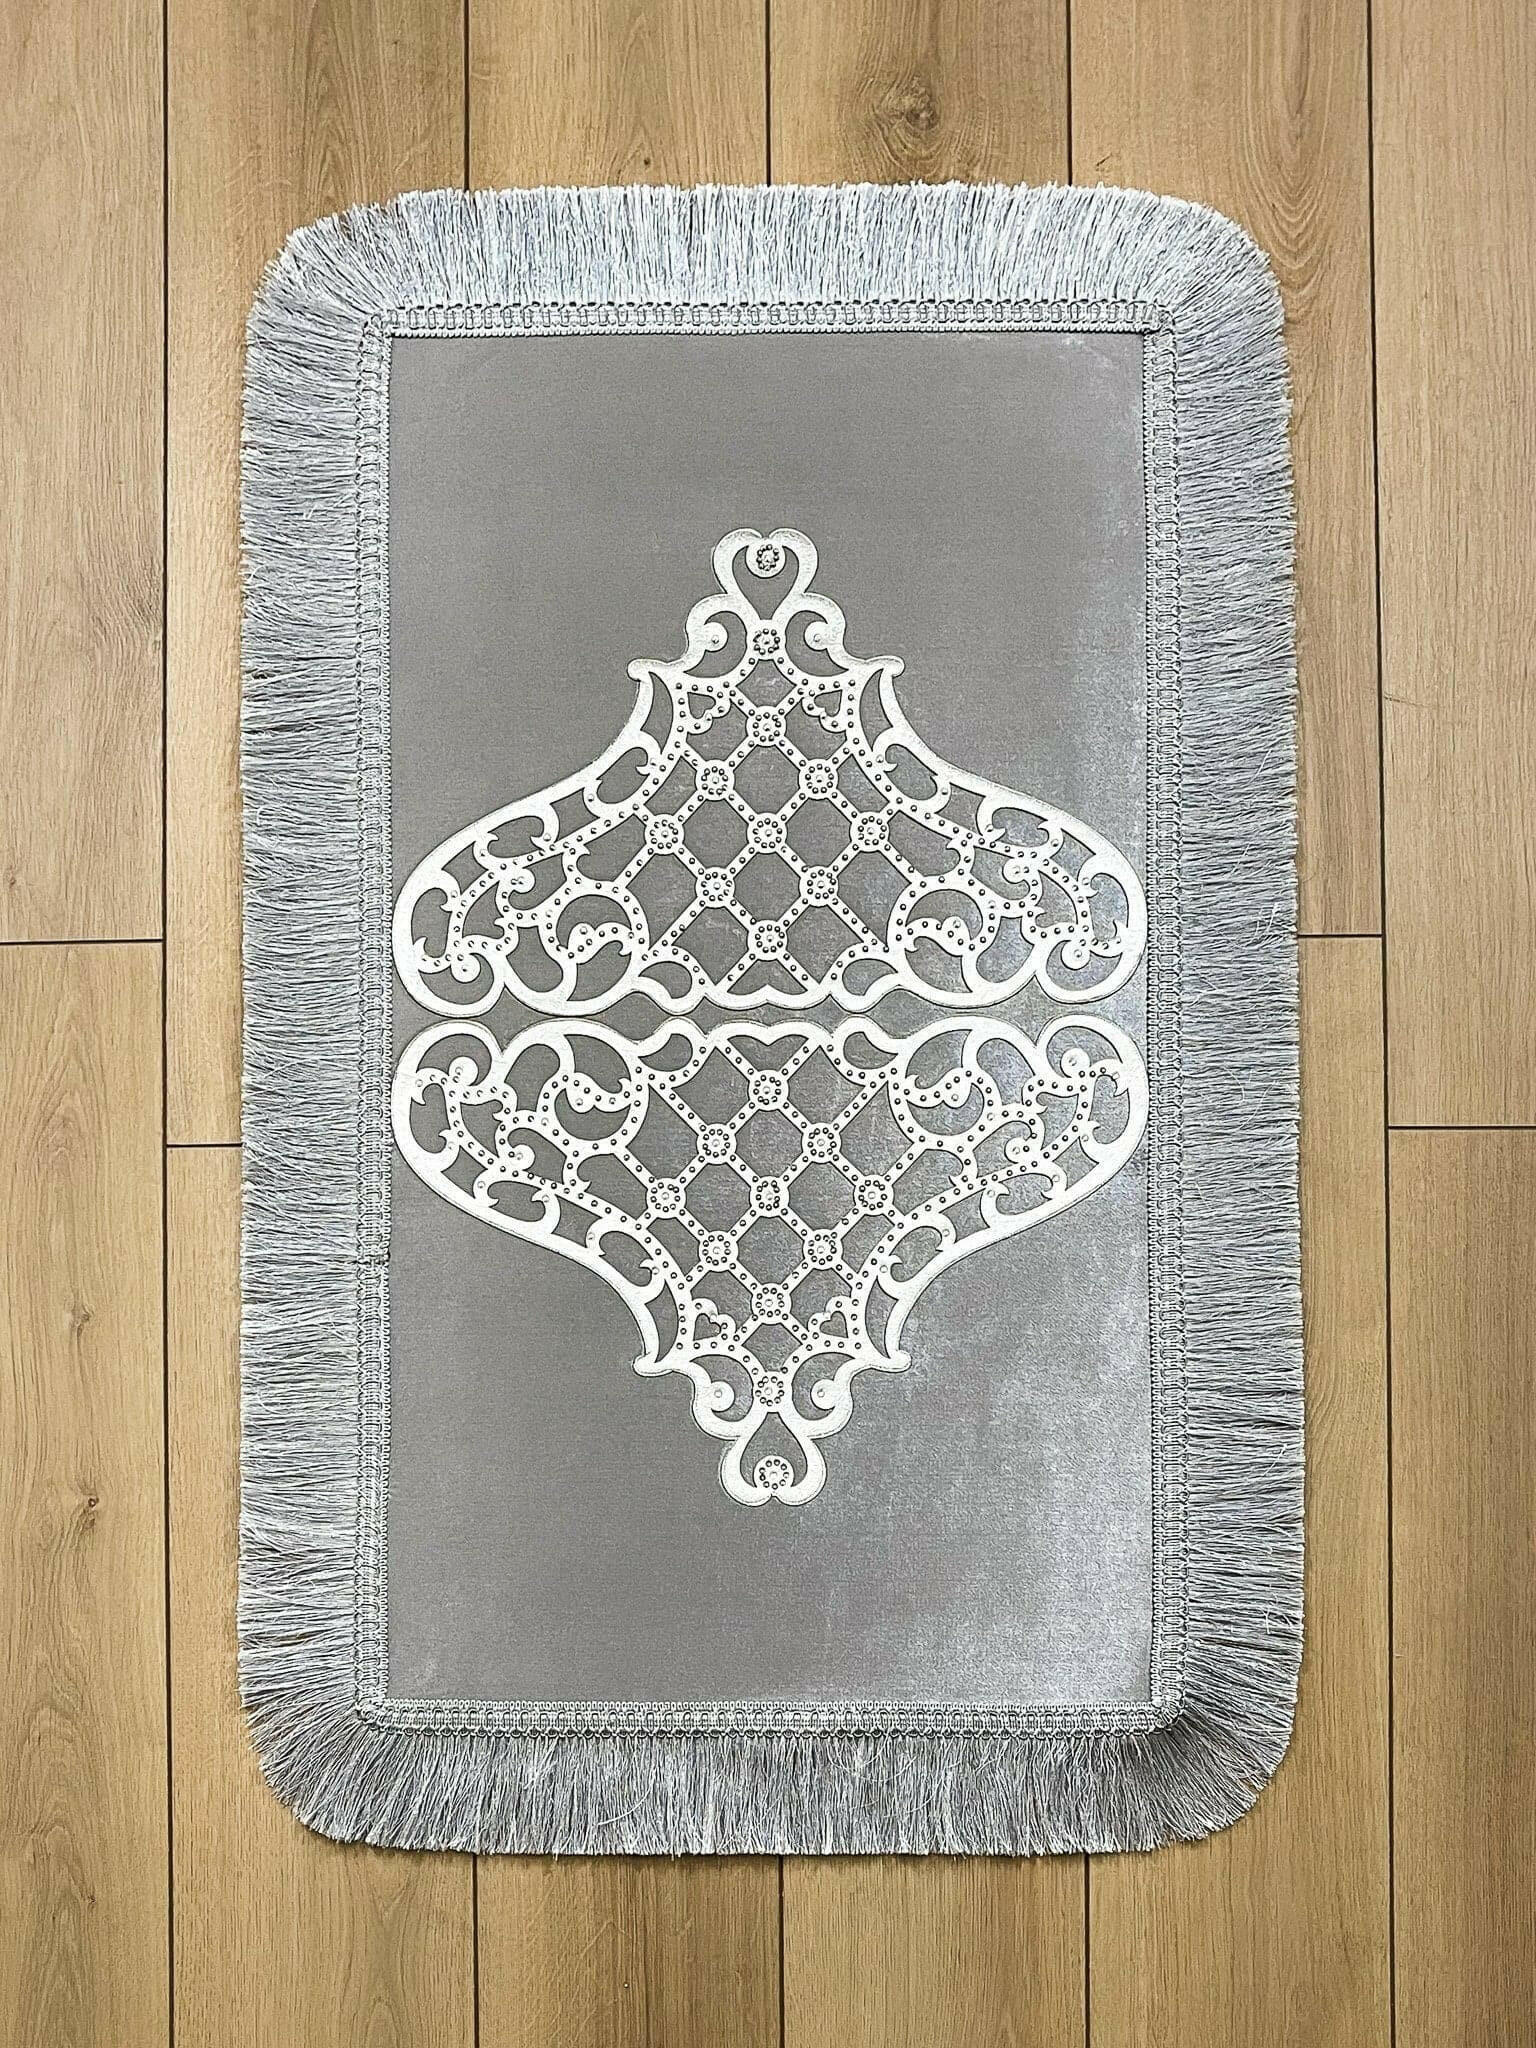 Mihrace Rug Oriental Chic Grey & Silver Color Rug - Creative Home Designs Rugs, Oriental Style Turkish Carpet, Rectangular Mat With Diamonds & Tassels